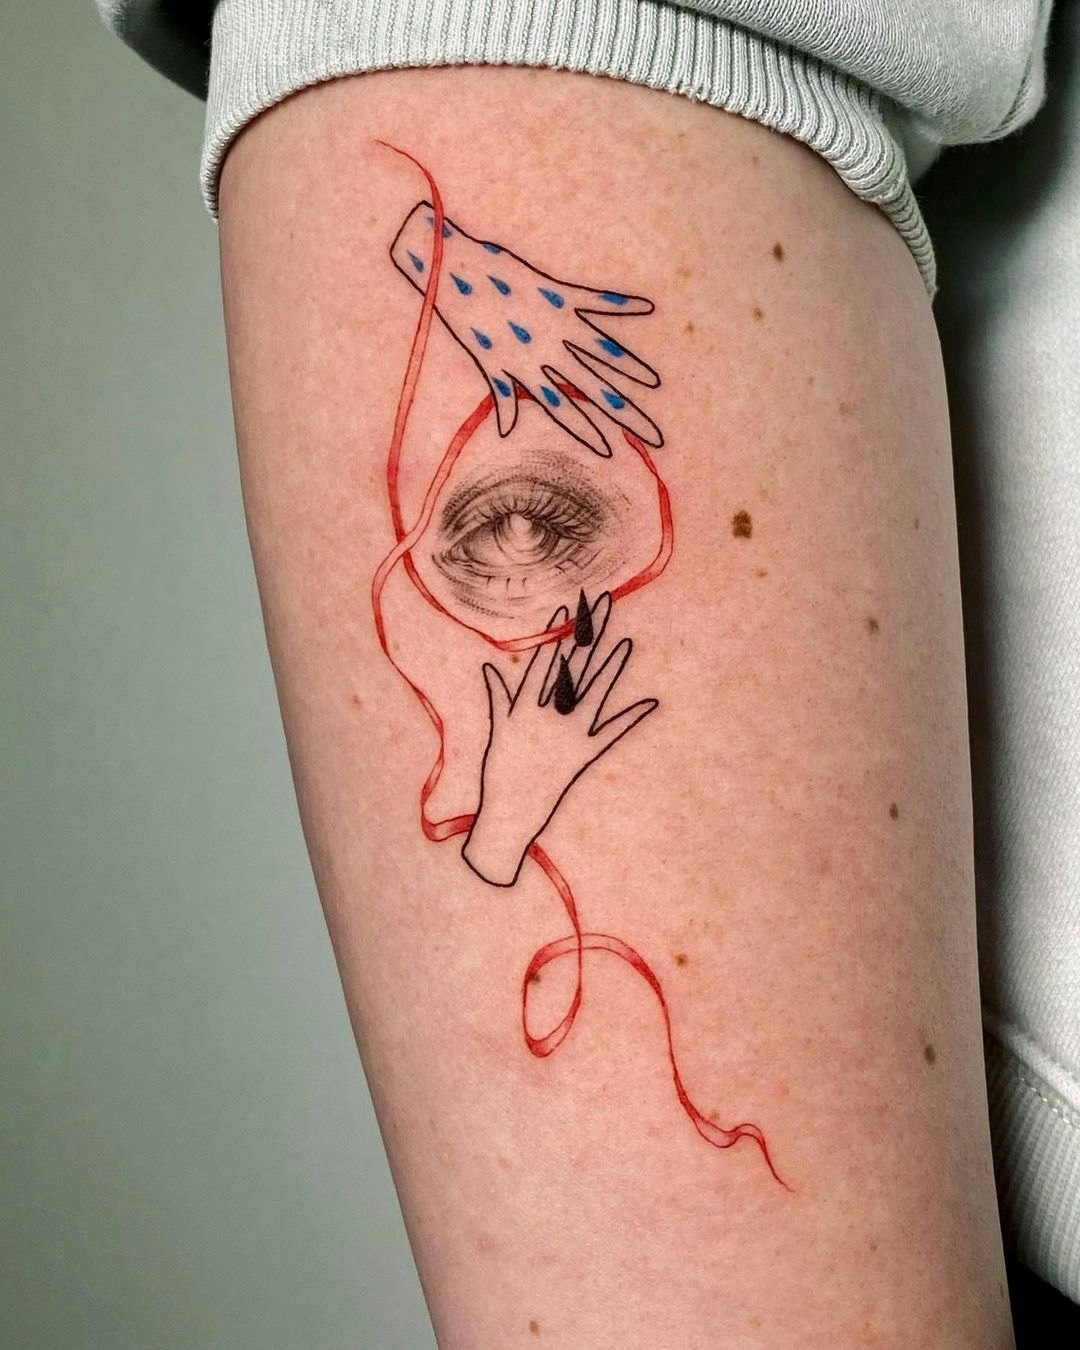 16 Tattoos Inspired by the Reality of OCD